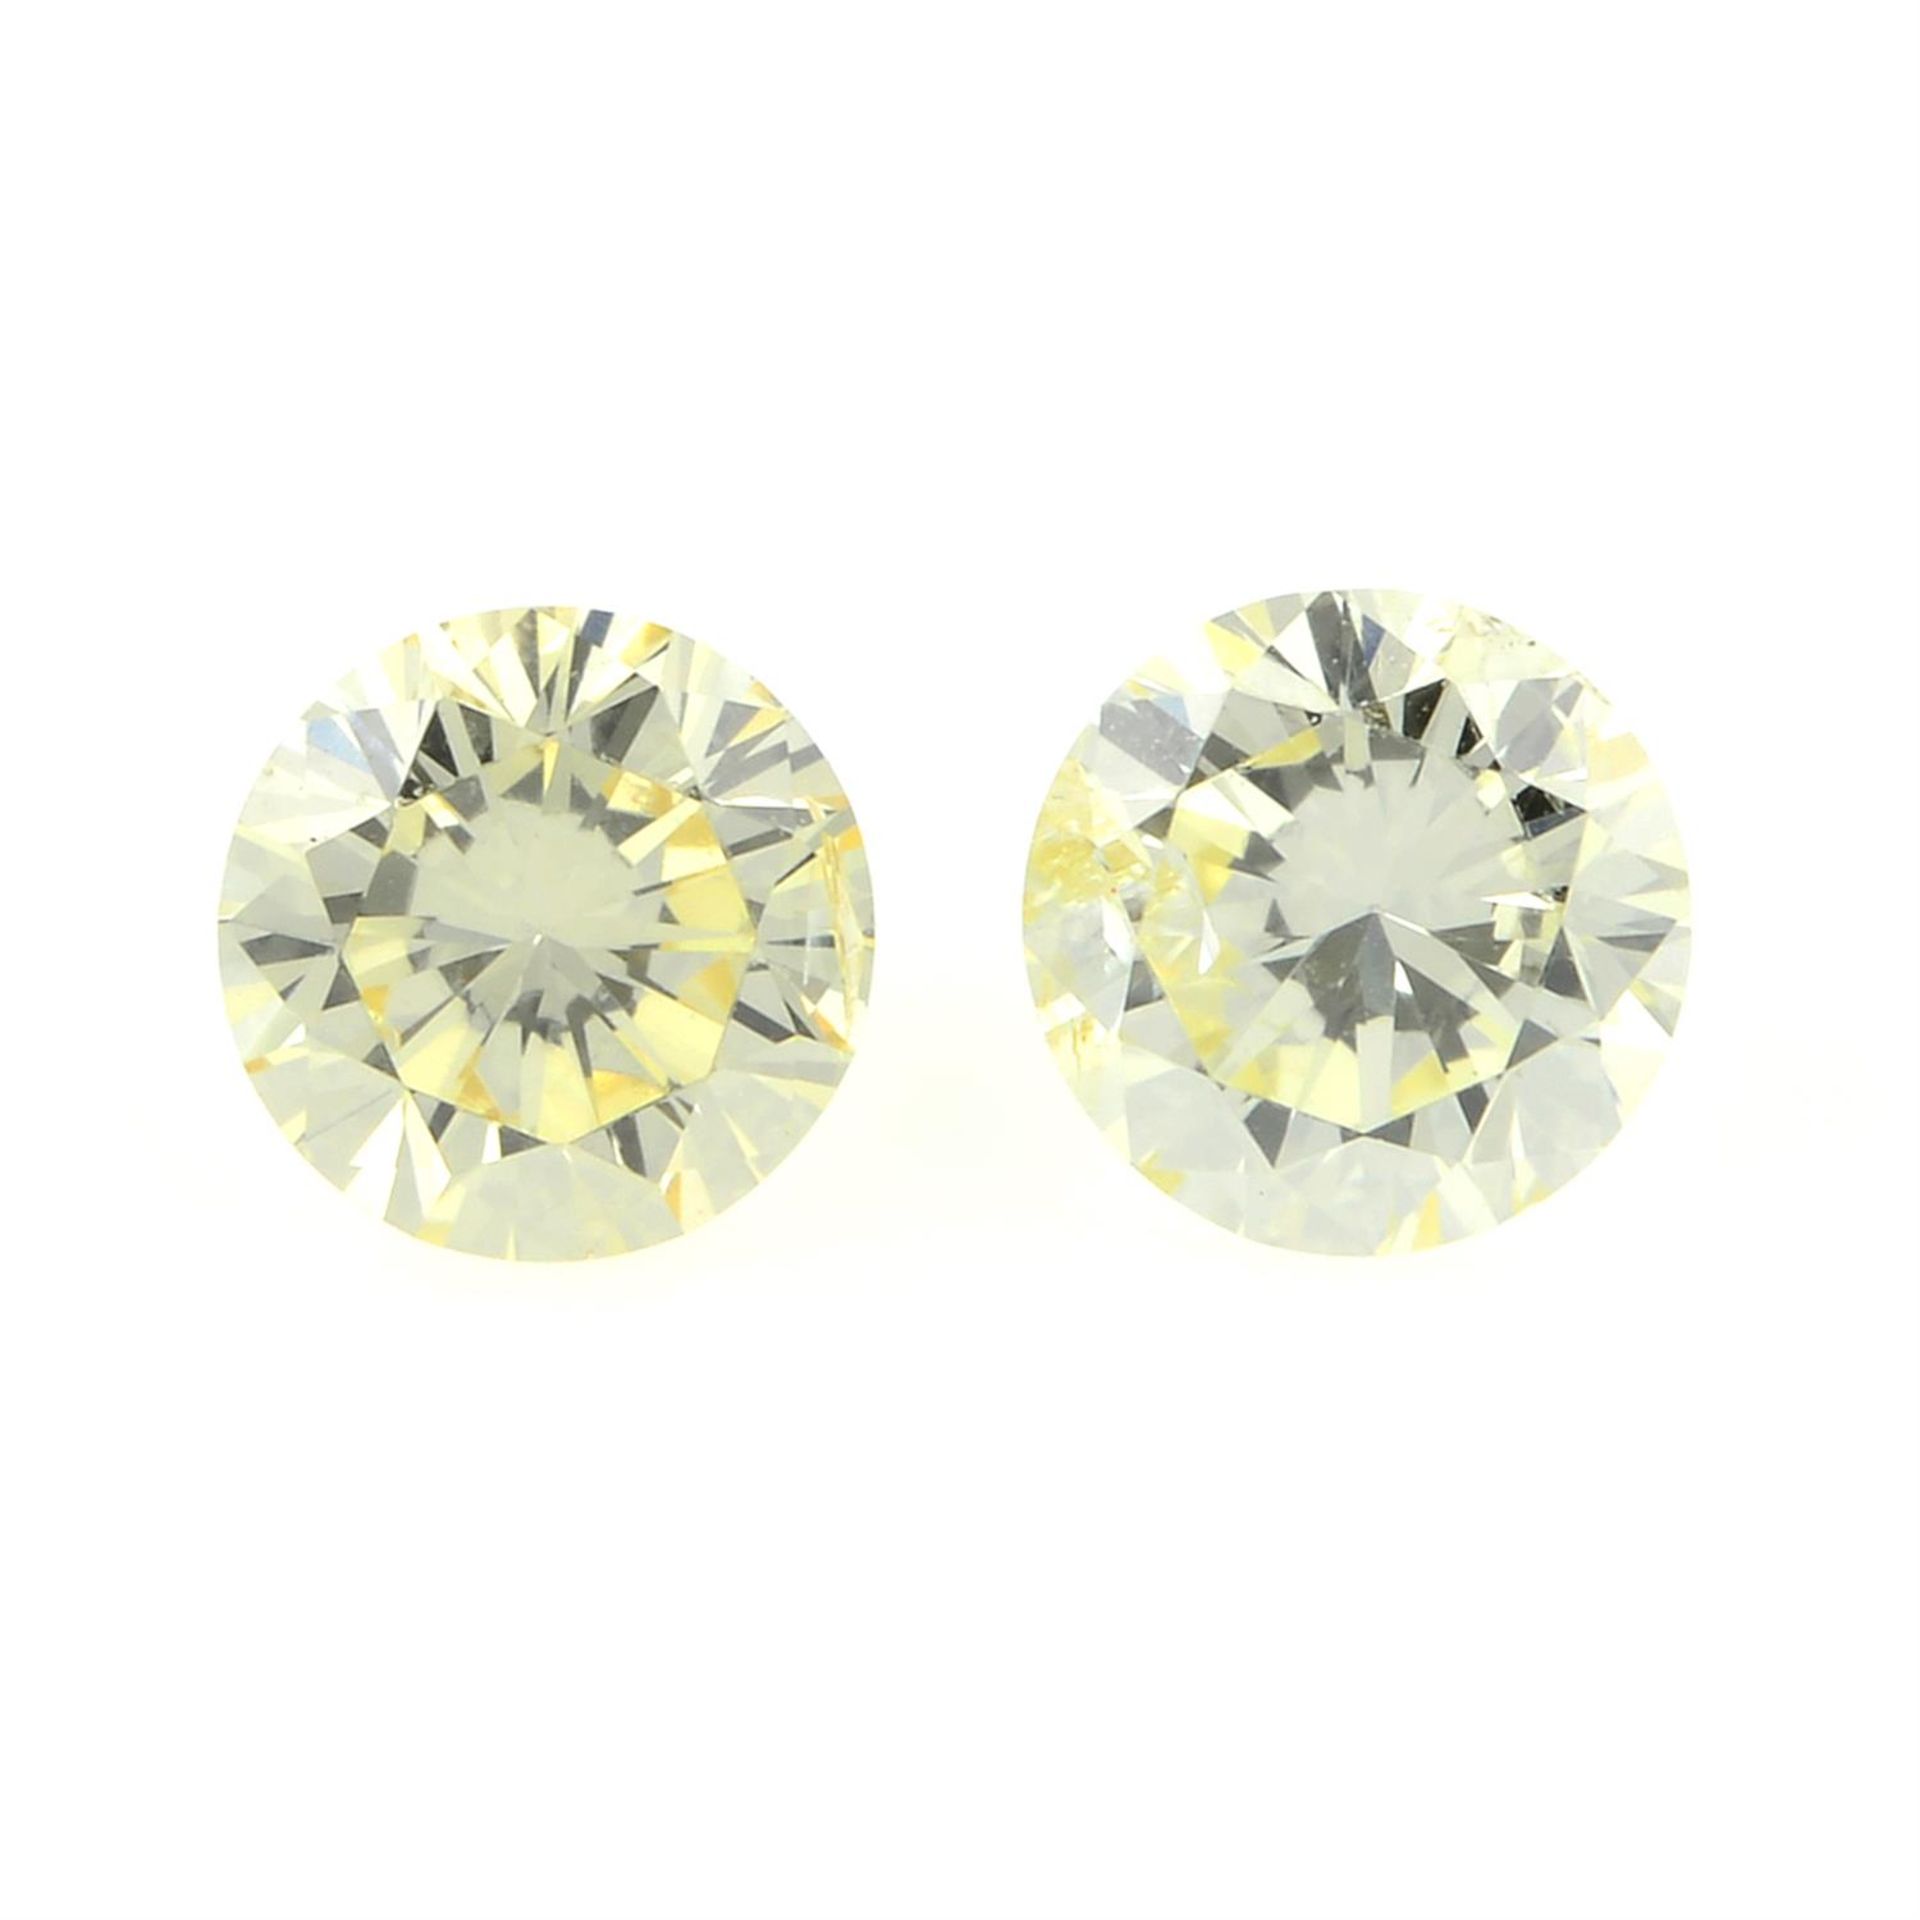 A pair of round brilliant-cut diamonds, weight 0.33ct and 0.30ct.